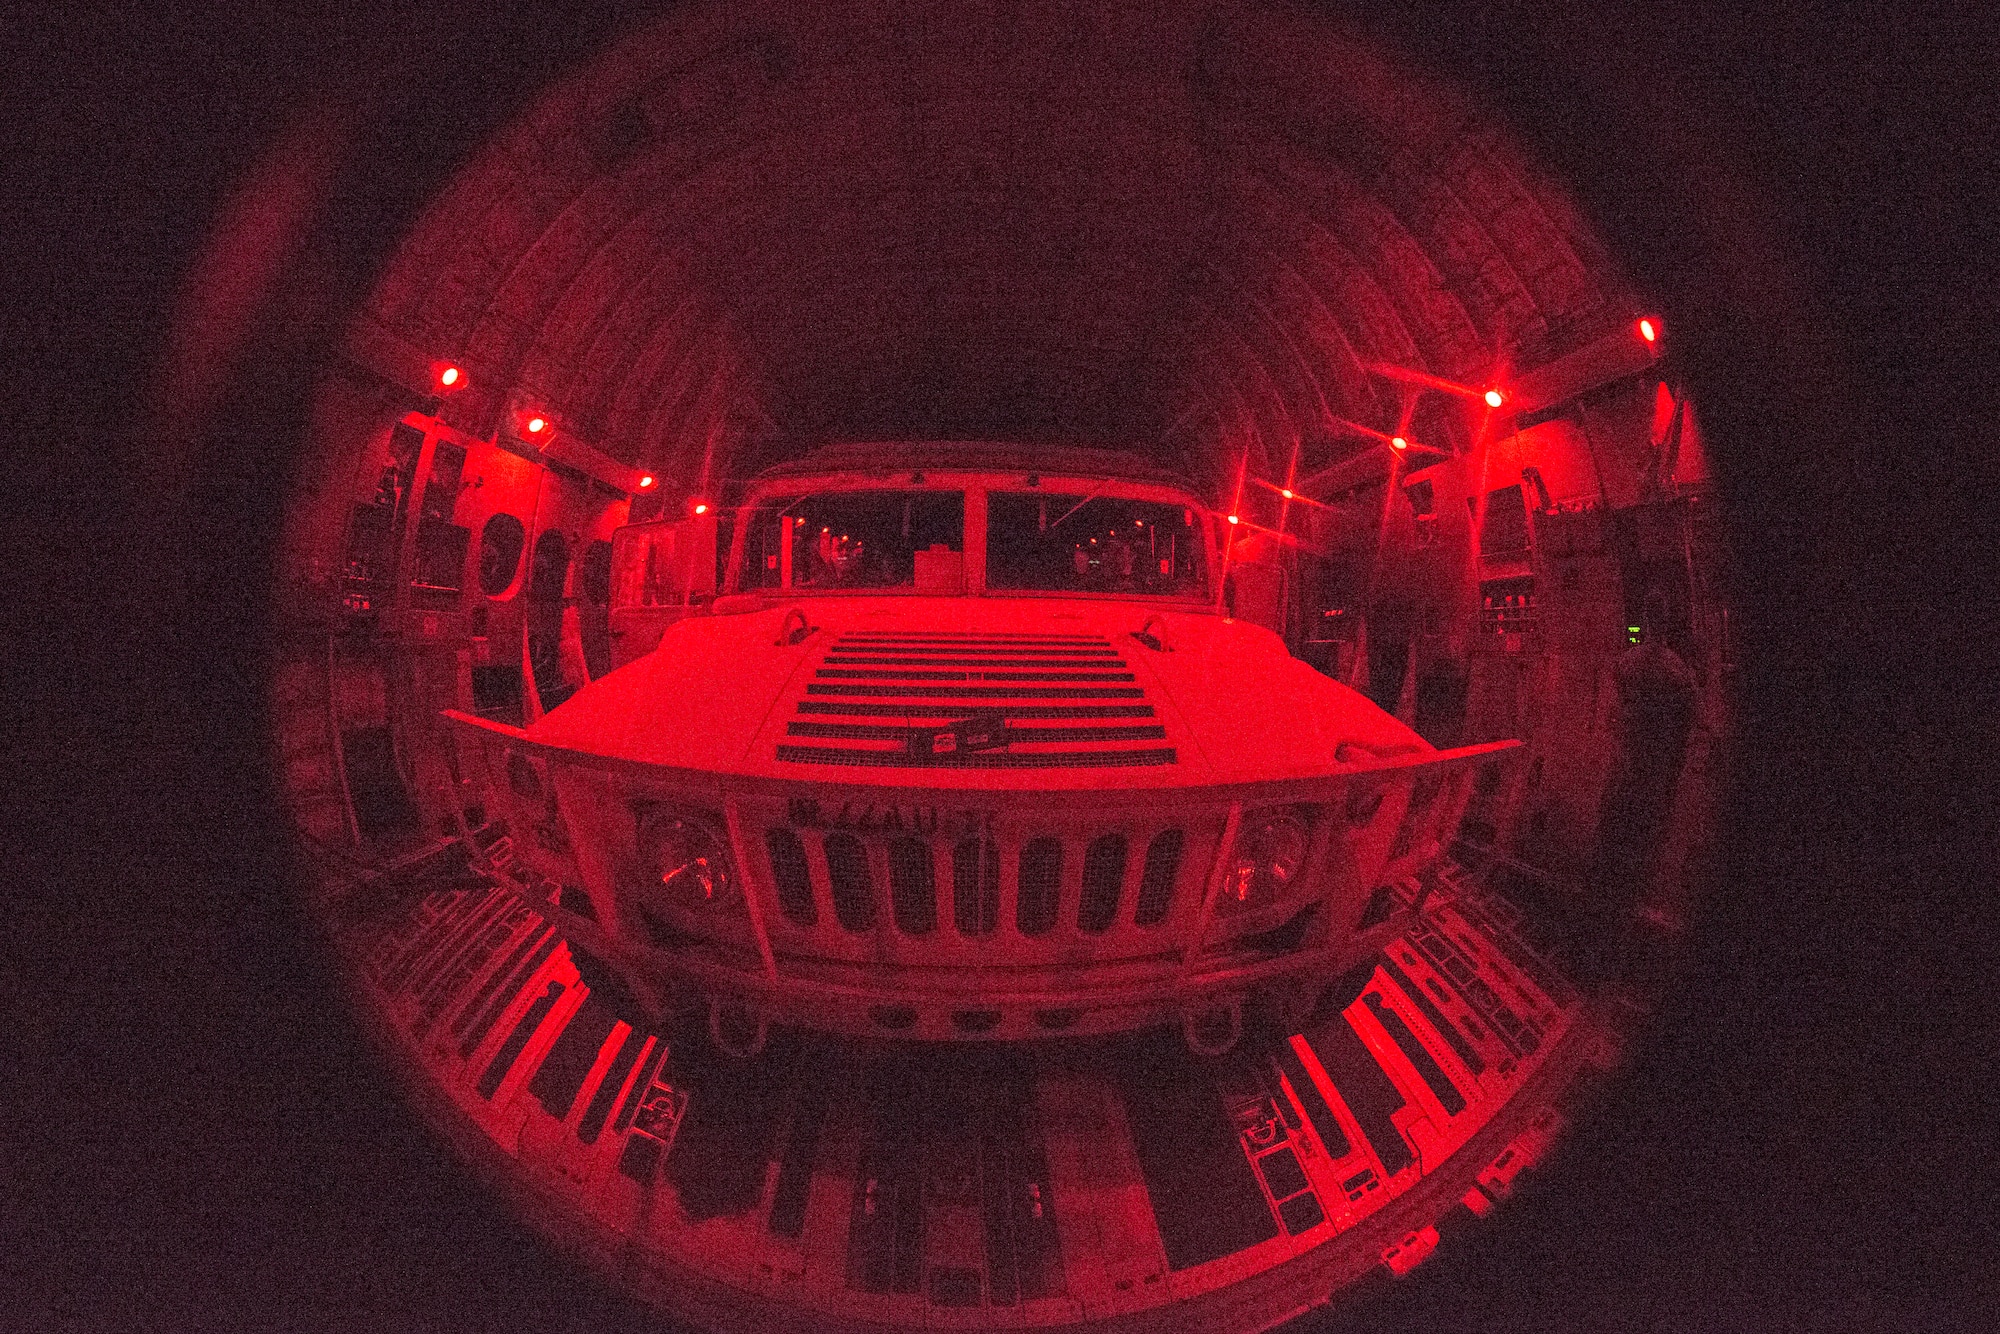 A U.S. Army Humvee sits on the cargo bay of a C-17 Globemaster III, assigned to the 437th Airlift Wing, as part of Exercise Dragon Lifeline August 8, 2019, above South Carolina. The deployment readiness exercise combined the capabilities of service members from Fort Bragg, N.C., Joint Base Charleston, S.C., and Joint Base Langley-Eustis, Va., focused on the rapid deployment of equipment, vehicles and personnel. Participants shared knowledge and tested their efficiency in moving assets by air, land, rail and sea during the training event. The annual exercise is just one of the critical readiness exercises the DOD conducts to maintain a lethal and ready force. (U.S. Air Force photo by Staff Sgt. Tenley Long)